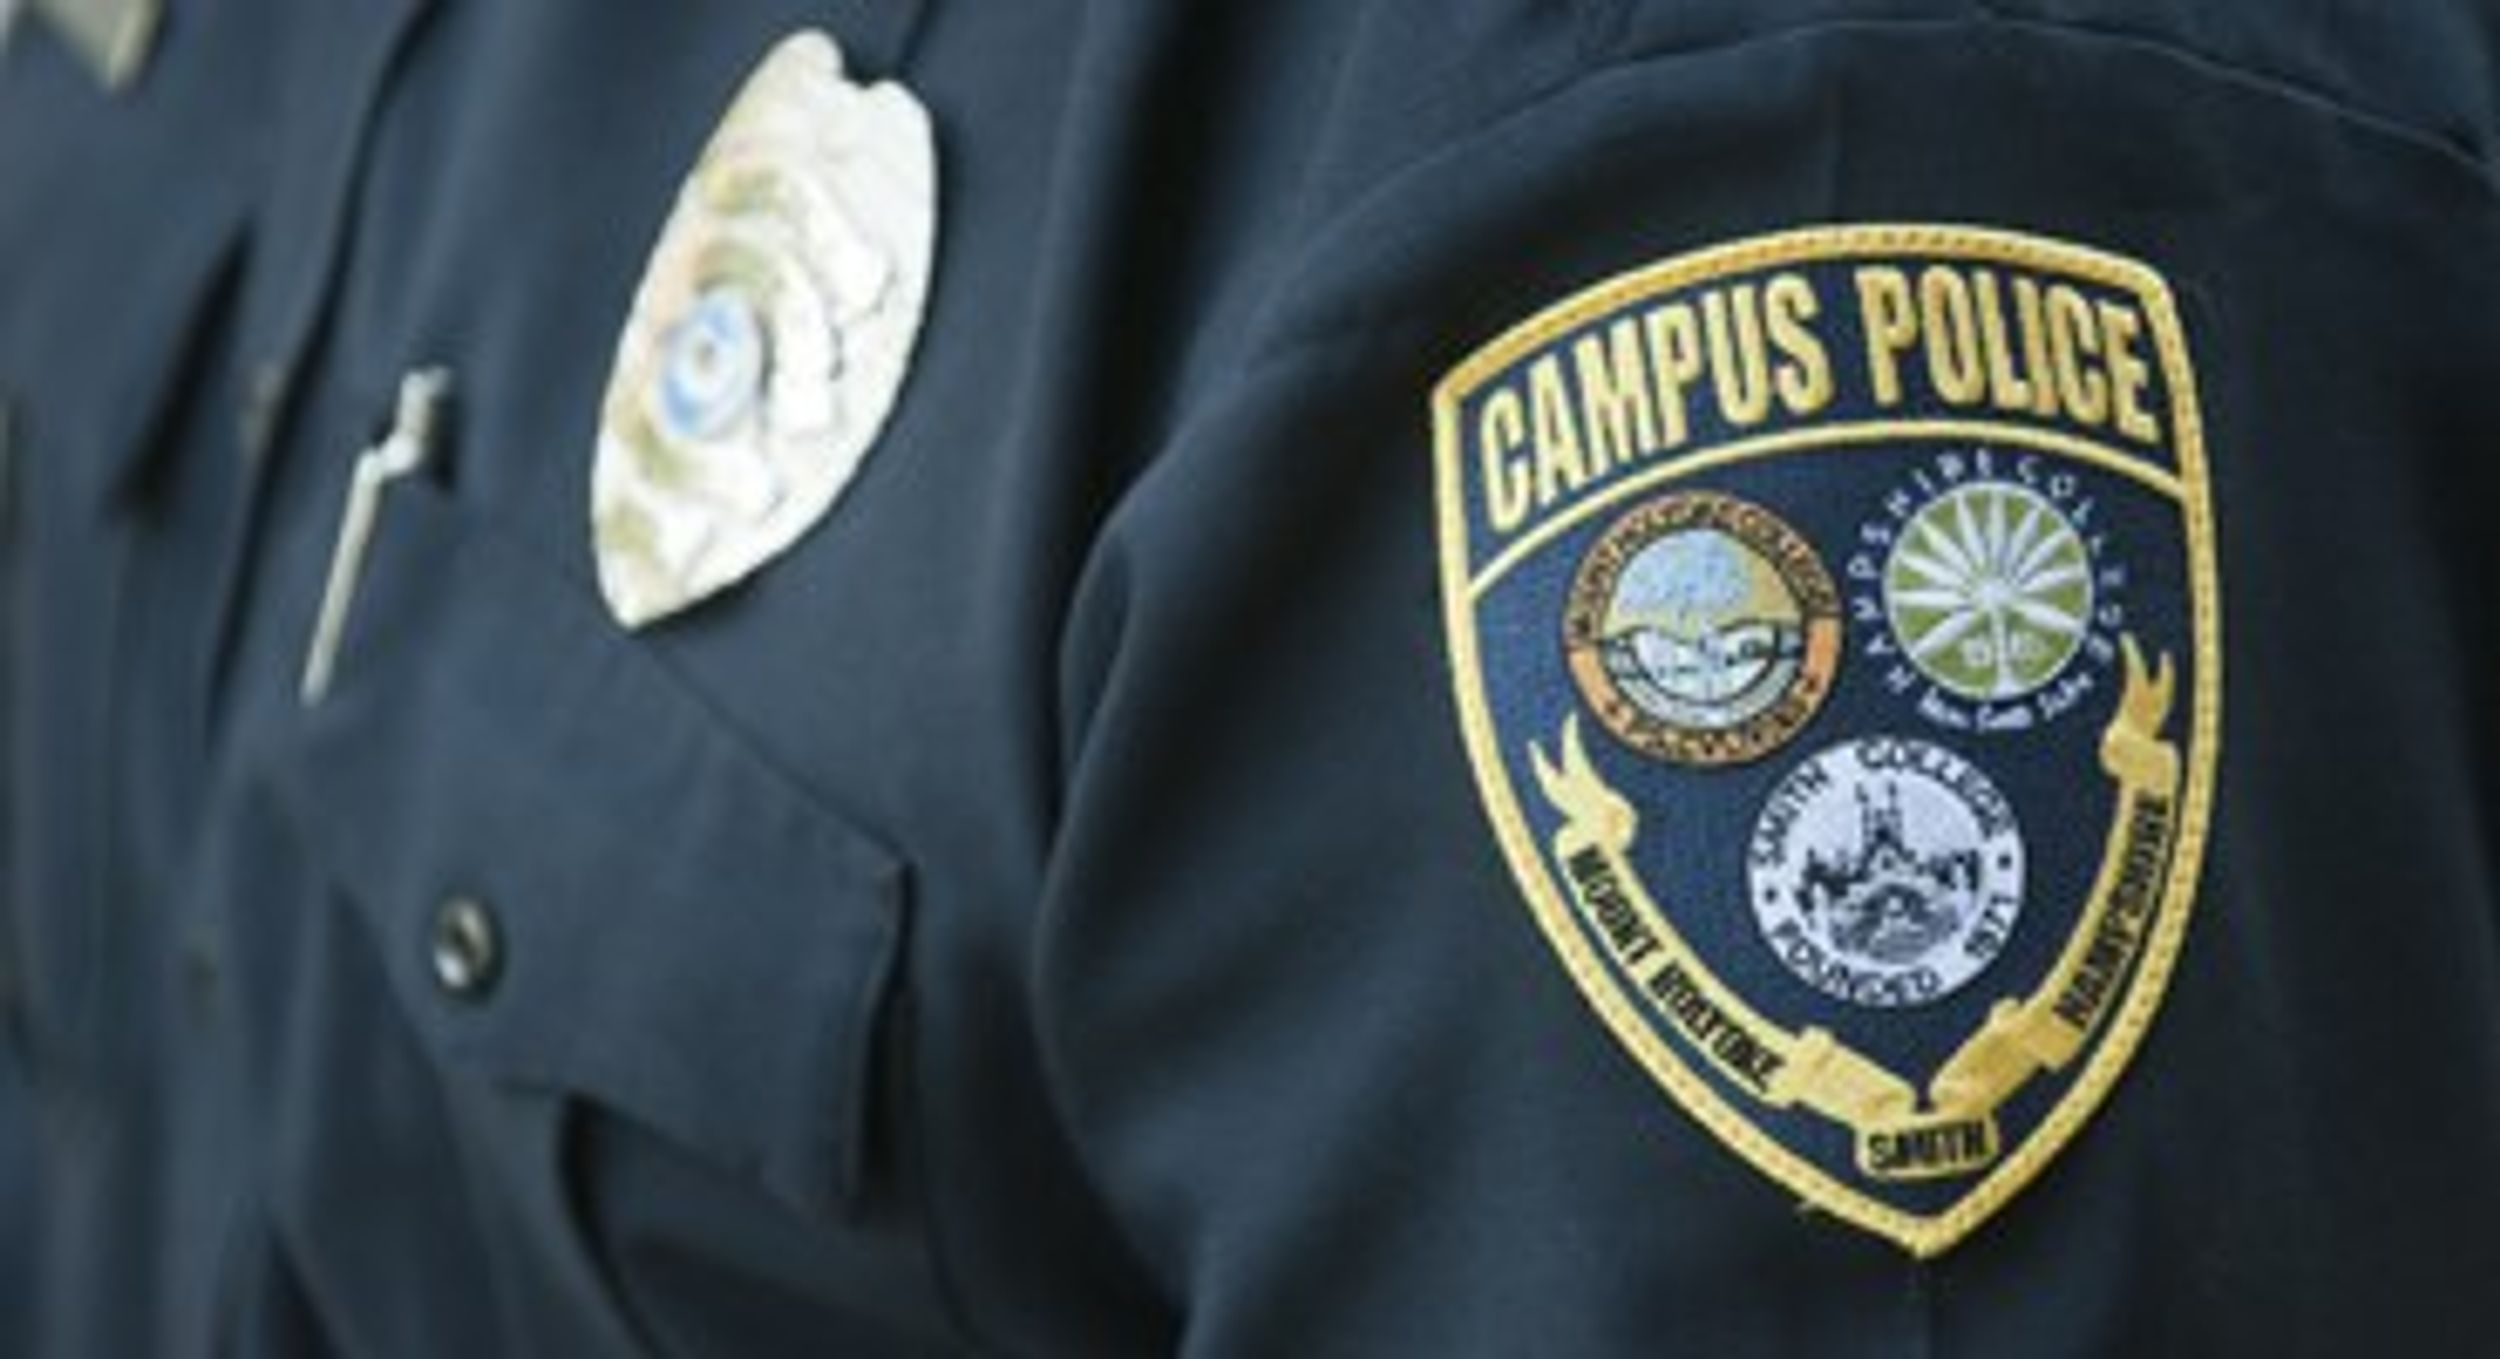 Campus Police, Part Of A Troubling Trend